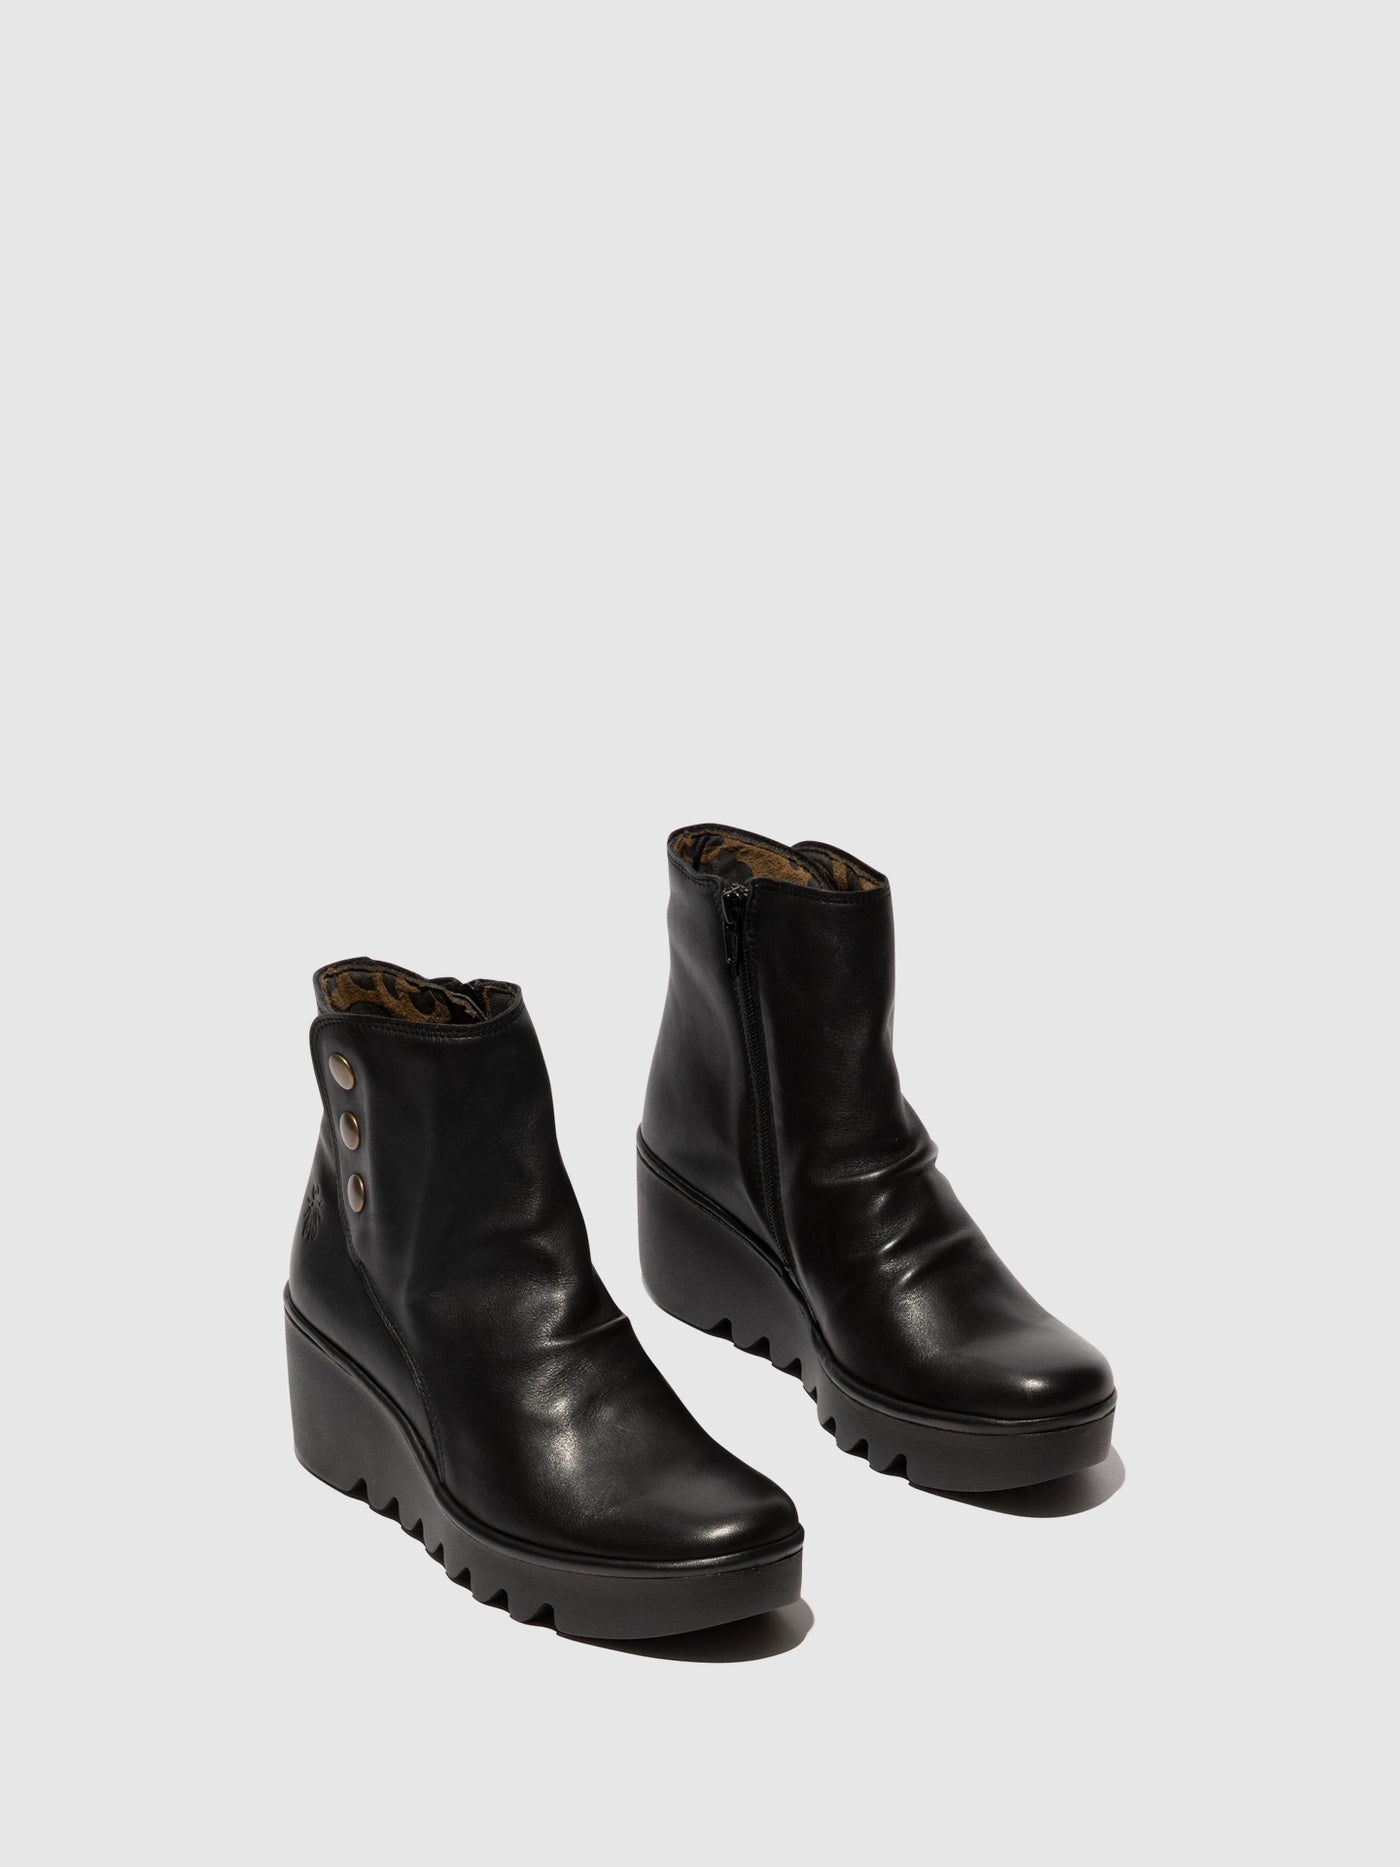 Zip Up Ankle Boots BROM344FLY BLACK